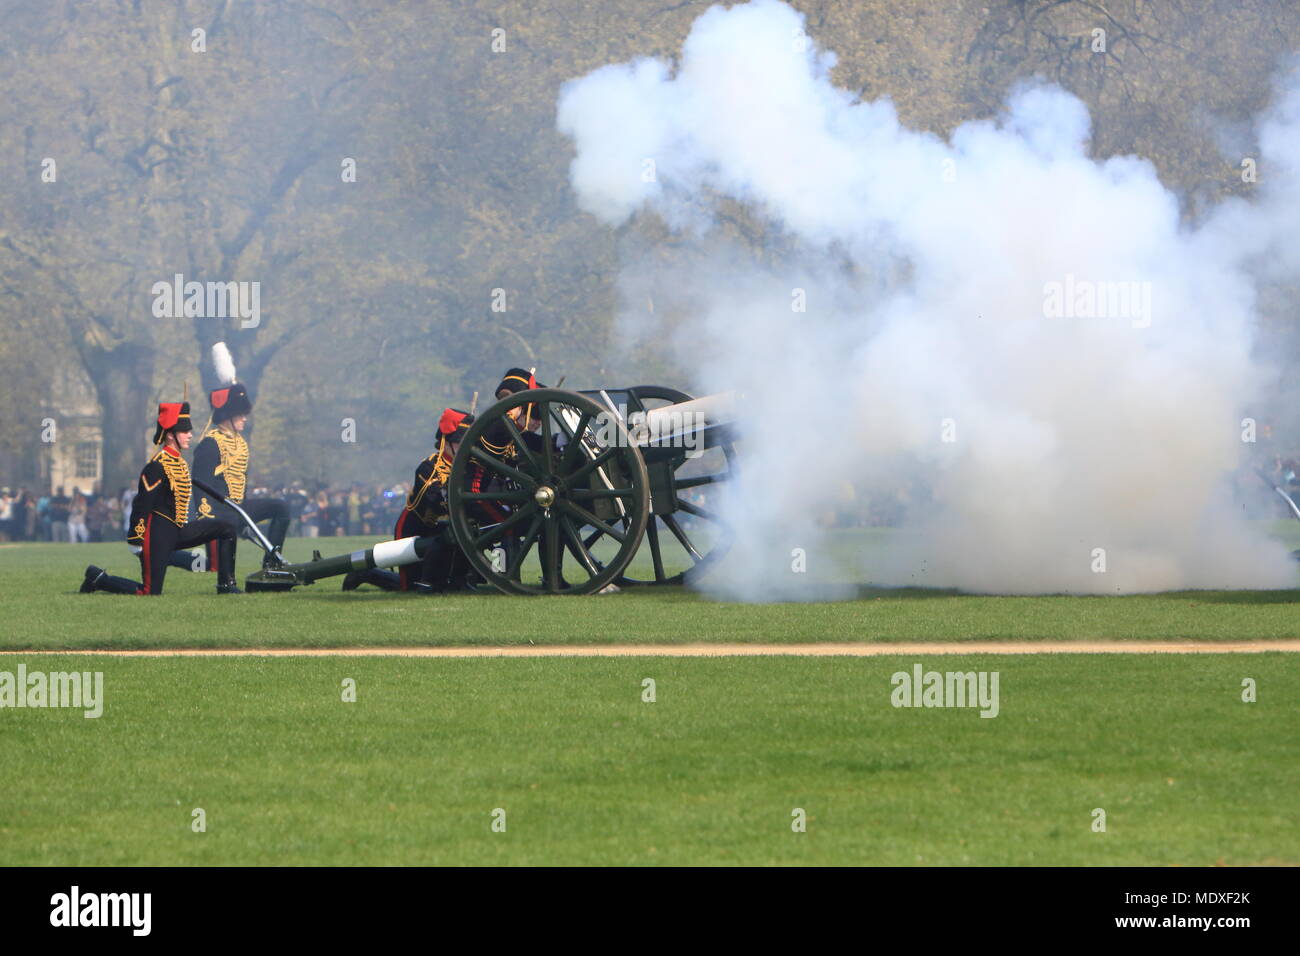 London, UK. 21st April, 2018. A 41 gun salute in Hyde Park, London, took place today on April 21st, to mark the 92nd birthday of Her Majesty Queen Elizabeth 11. Credit: Monica Wells/Alamy Live News Stock Photo